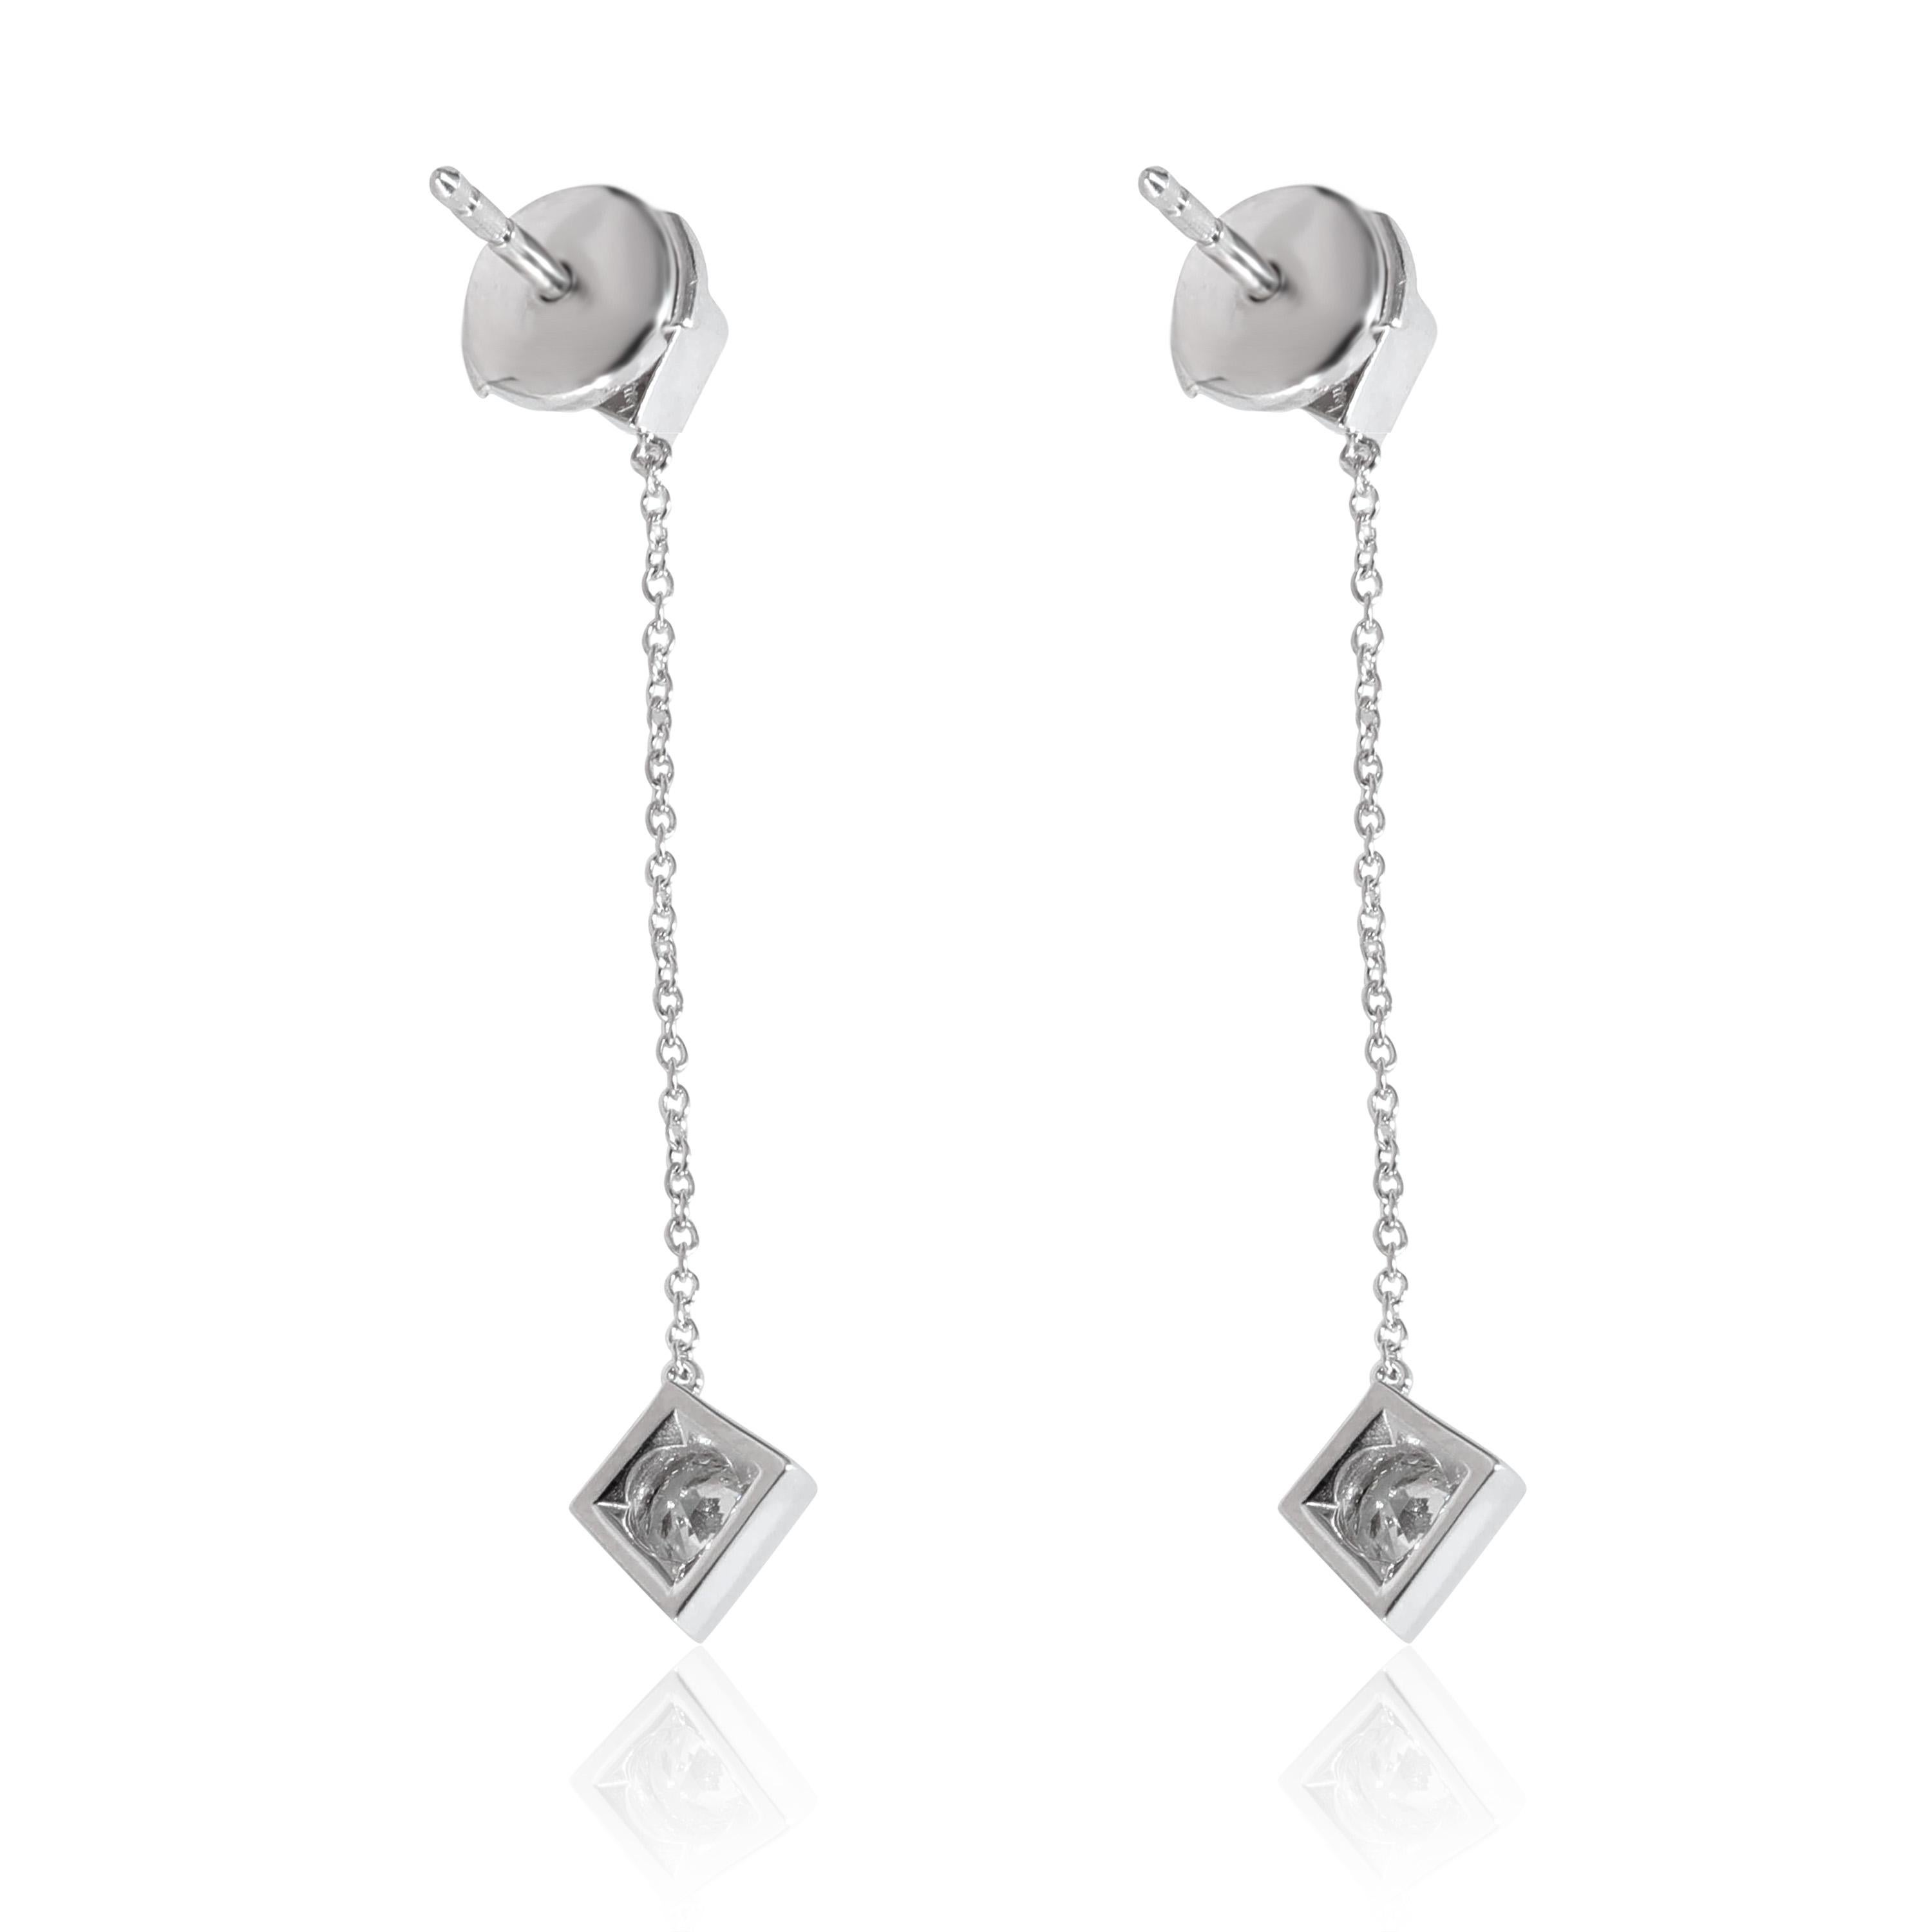 Tiffany & Co. Frank Gehry Torque Cube Drop Earring in 18k White Gold 0.40 CTW In Excellent Condition For Sale In New York, NY